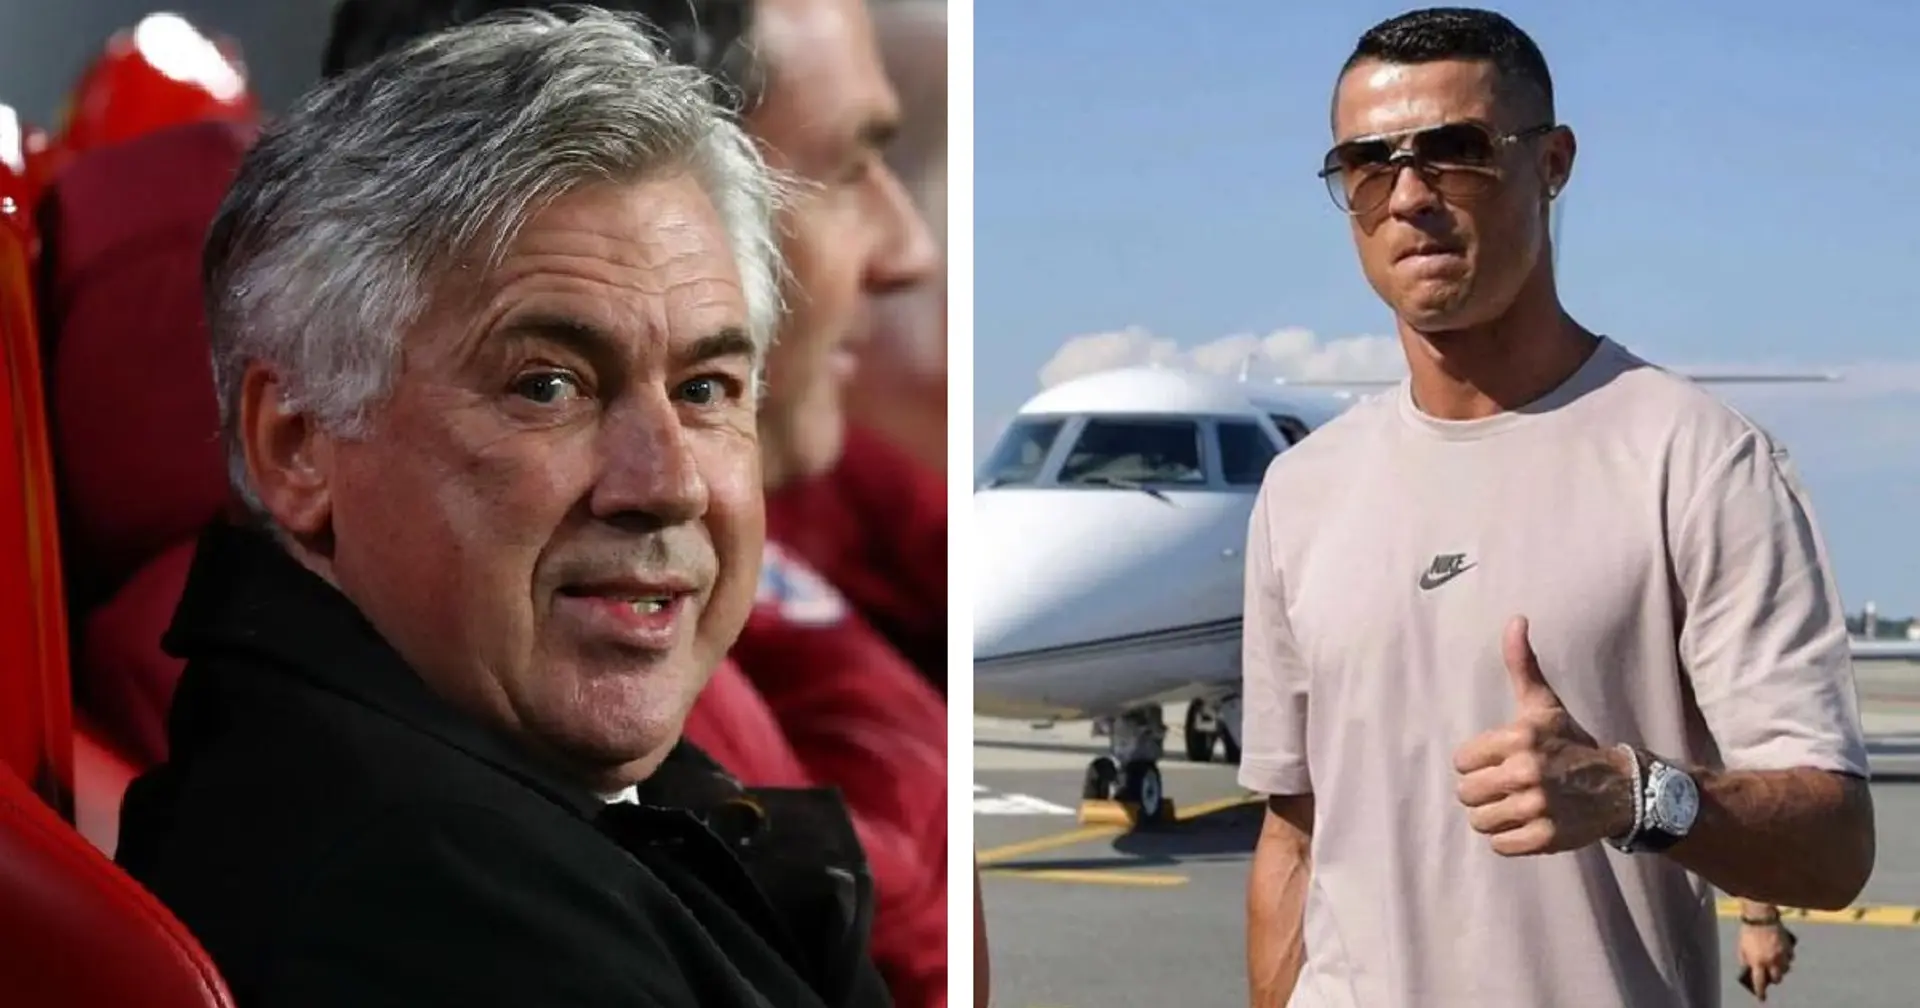 No Real Madrid return for Ronaldo & 2 more big Man United stories you might've missed 